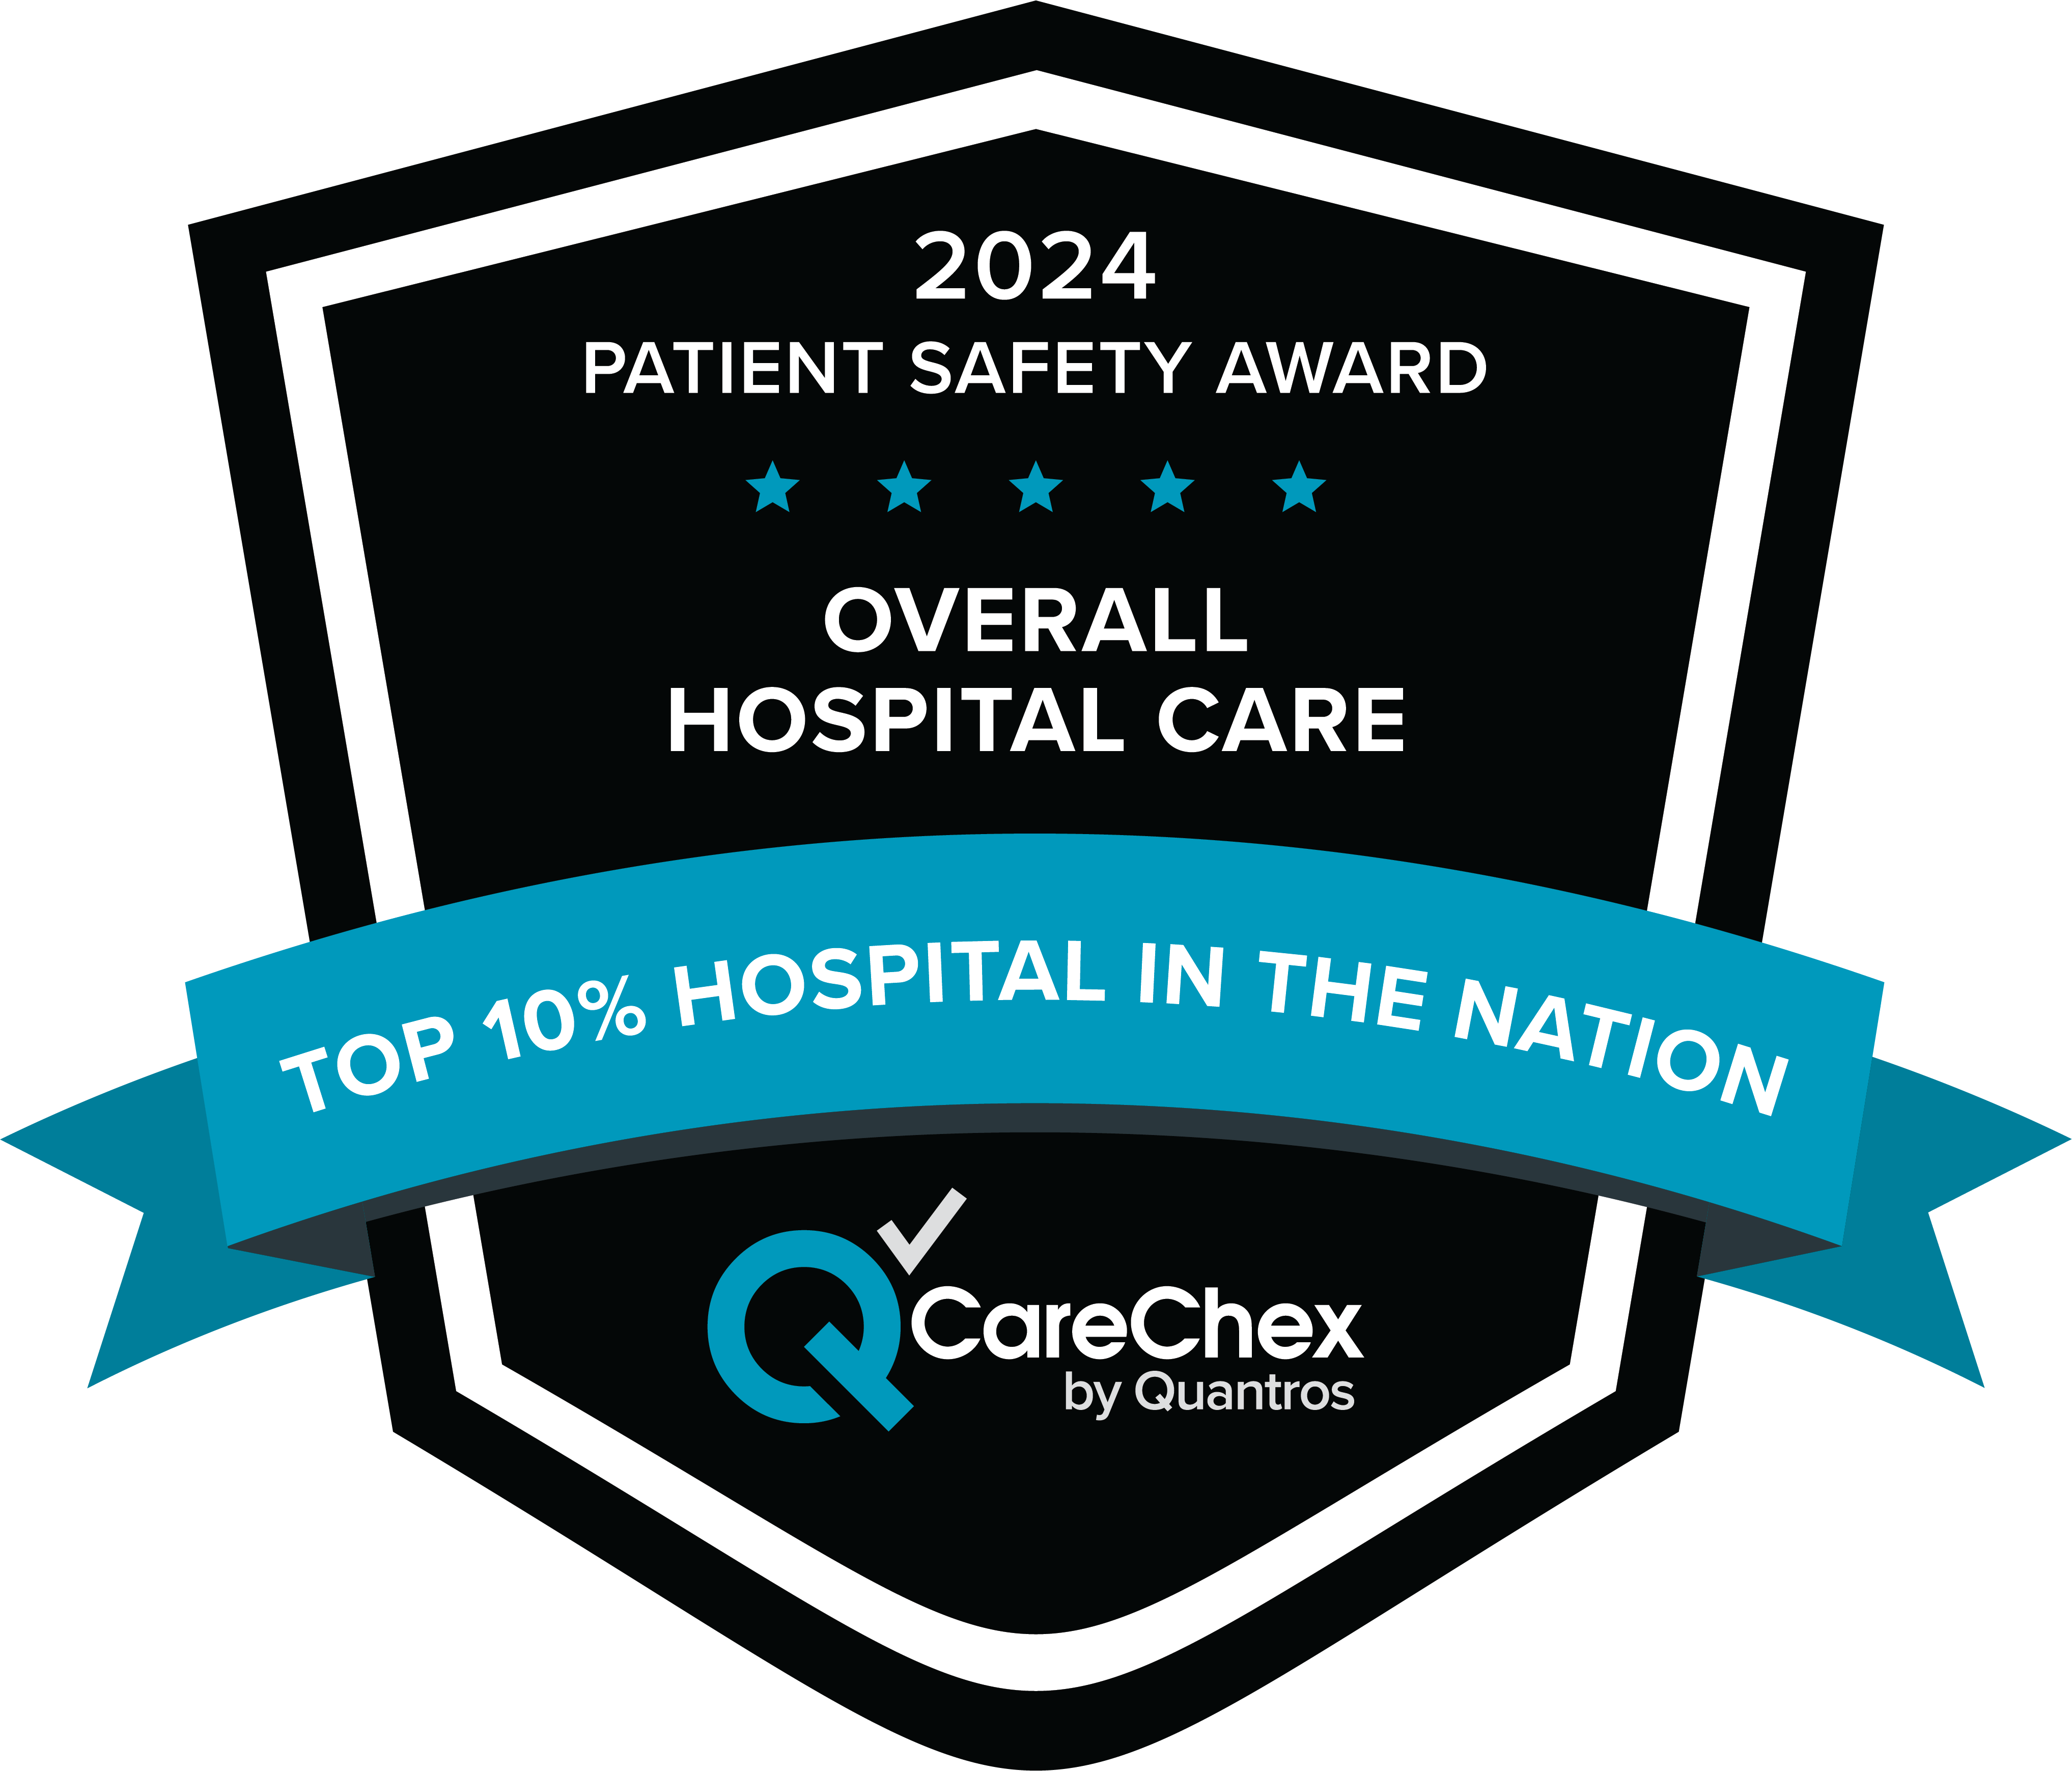 Awards badge for Top 10% Hospital in the Nation for Patient Safety in Overall Medical Care - 2024 CareChex by Quantros